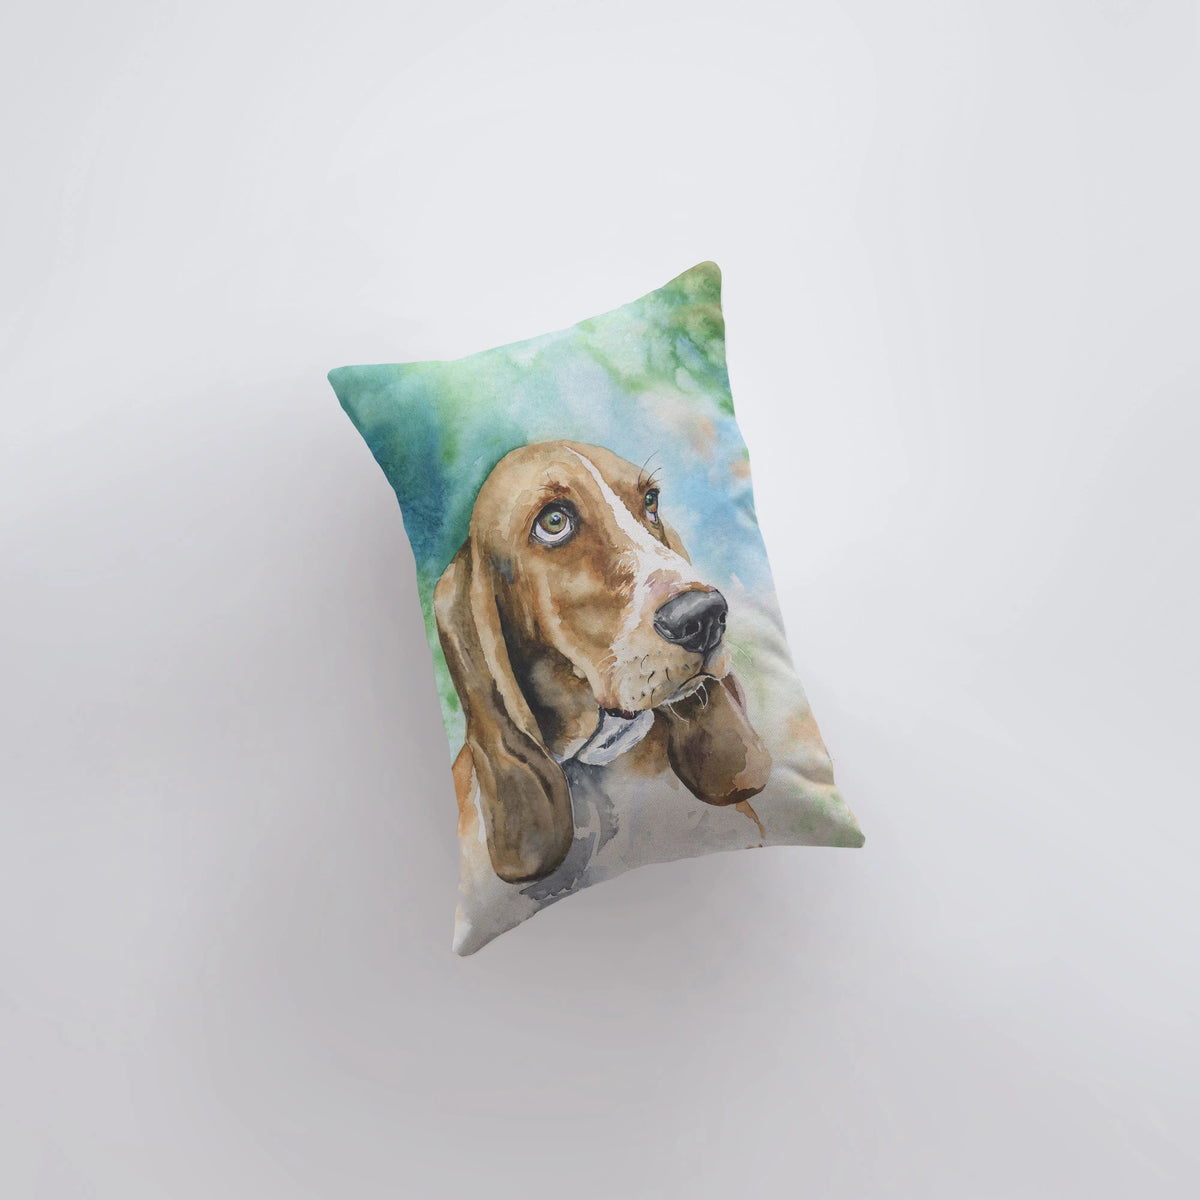 Basset Hound | 12x18 | Dog Watercolor | Pillow Cover | Home Decor | Custom Dog Pillow | Dog Mom | Accent Pillow Covers | Throw Pillow Covers